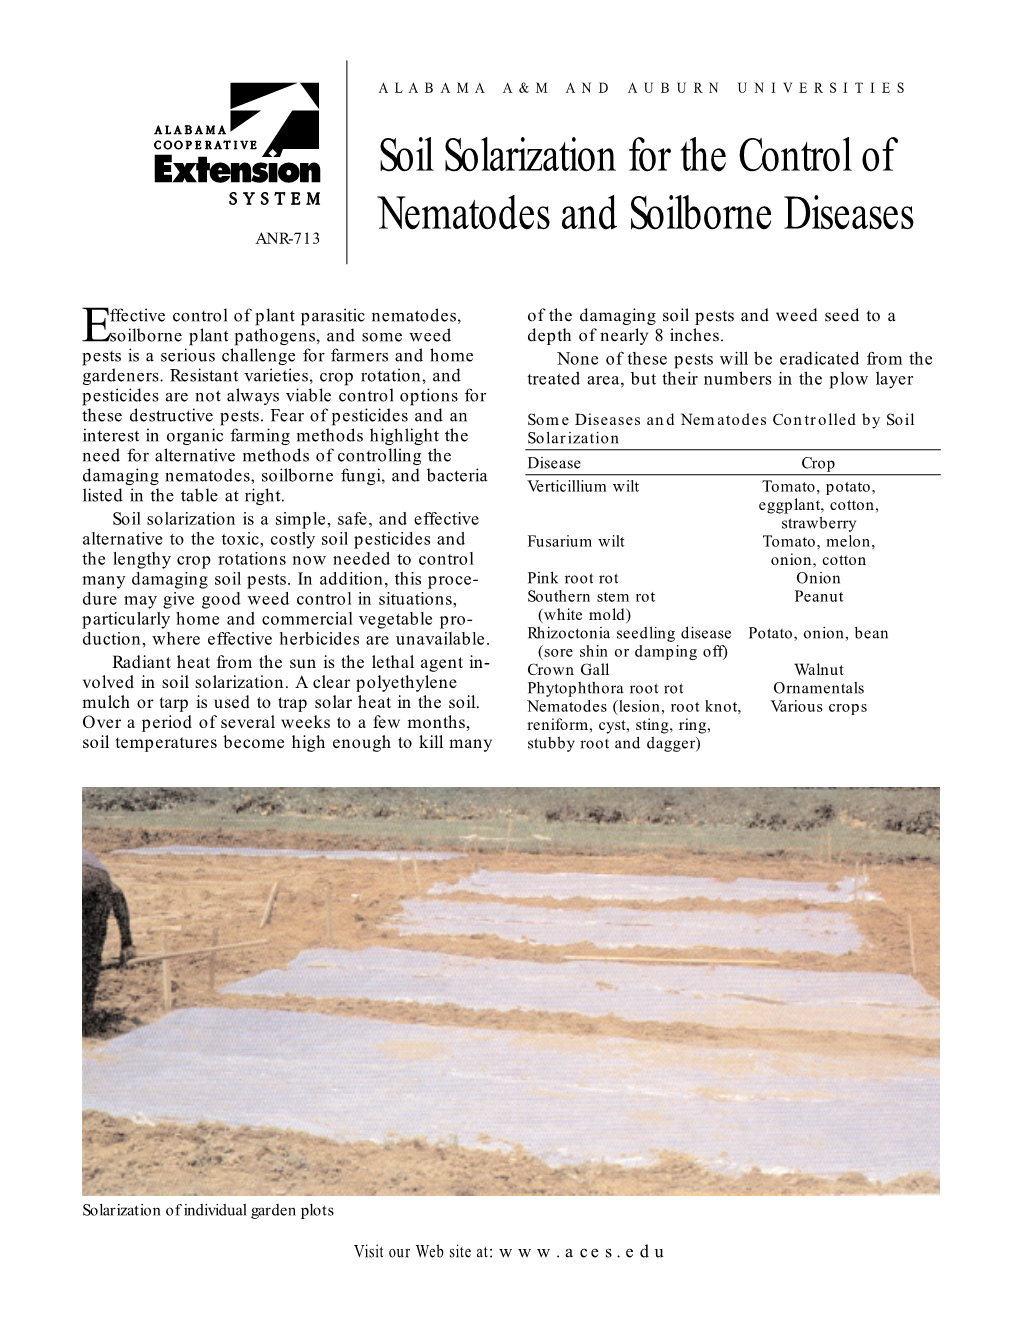 Soil Solarization for the Control of Nematodes and Soilborne Diseases ANR-713